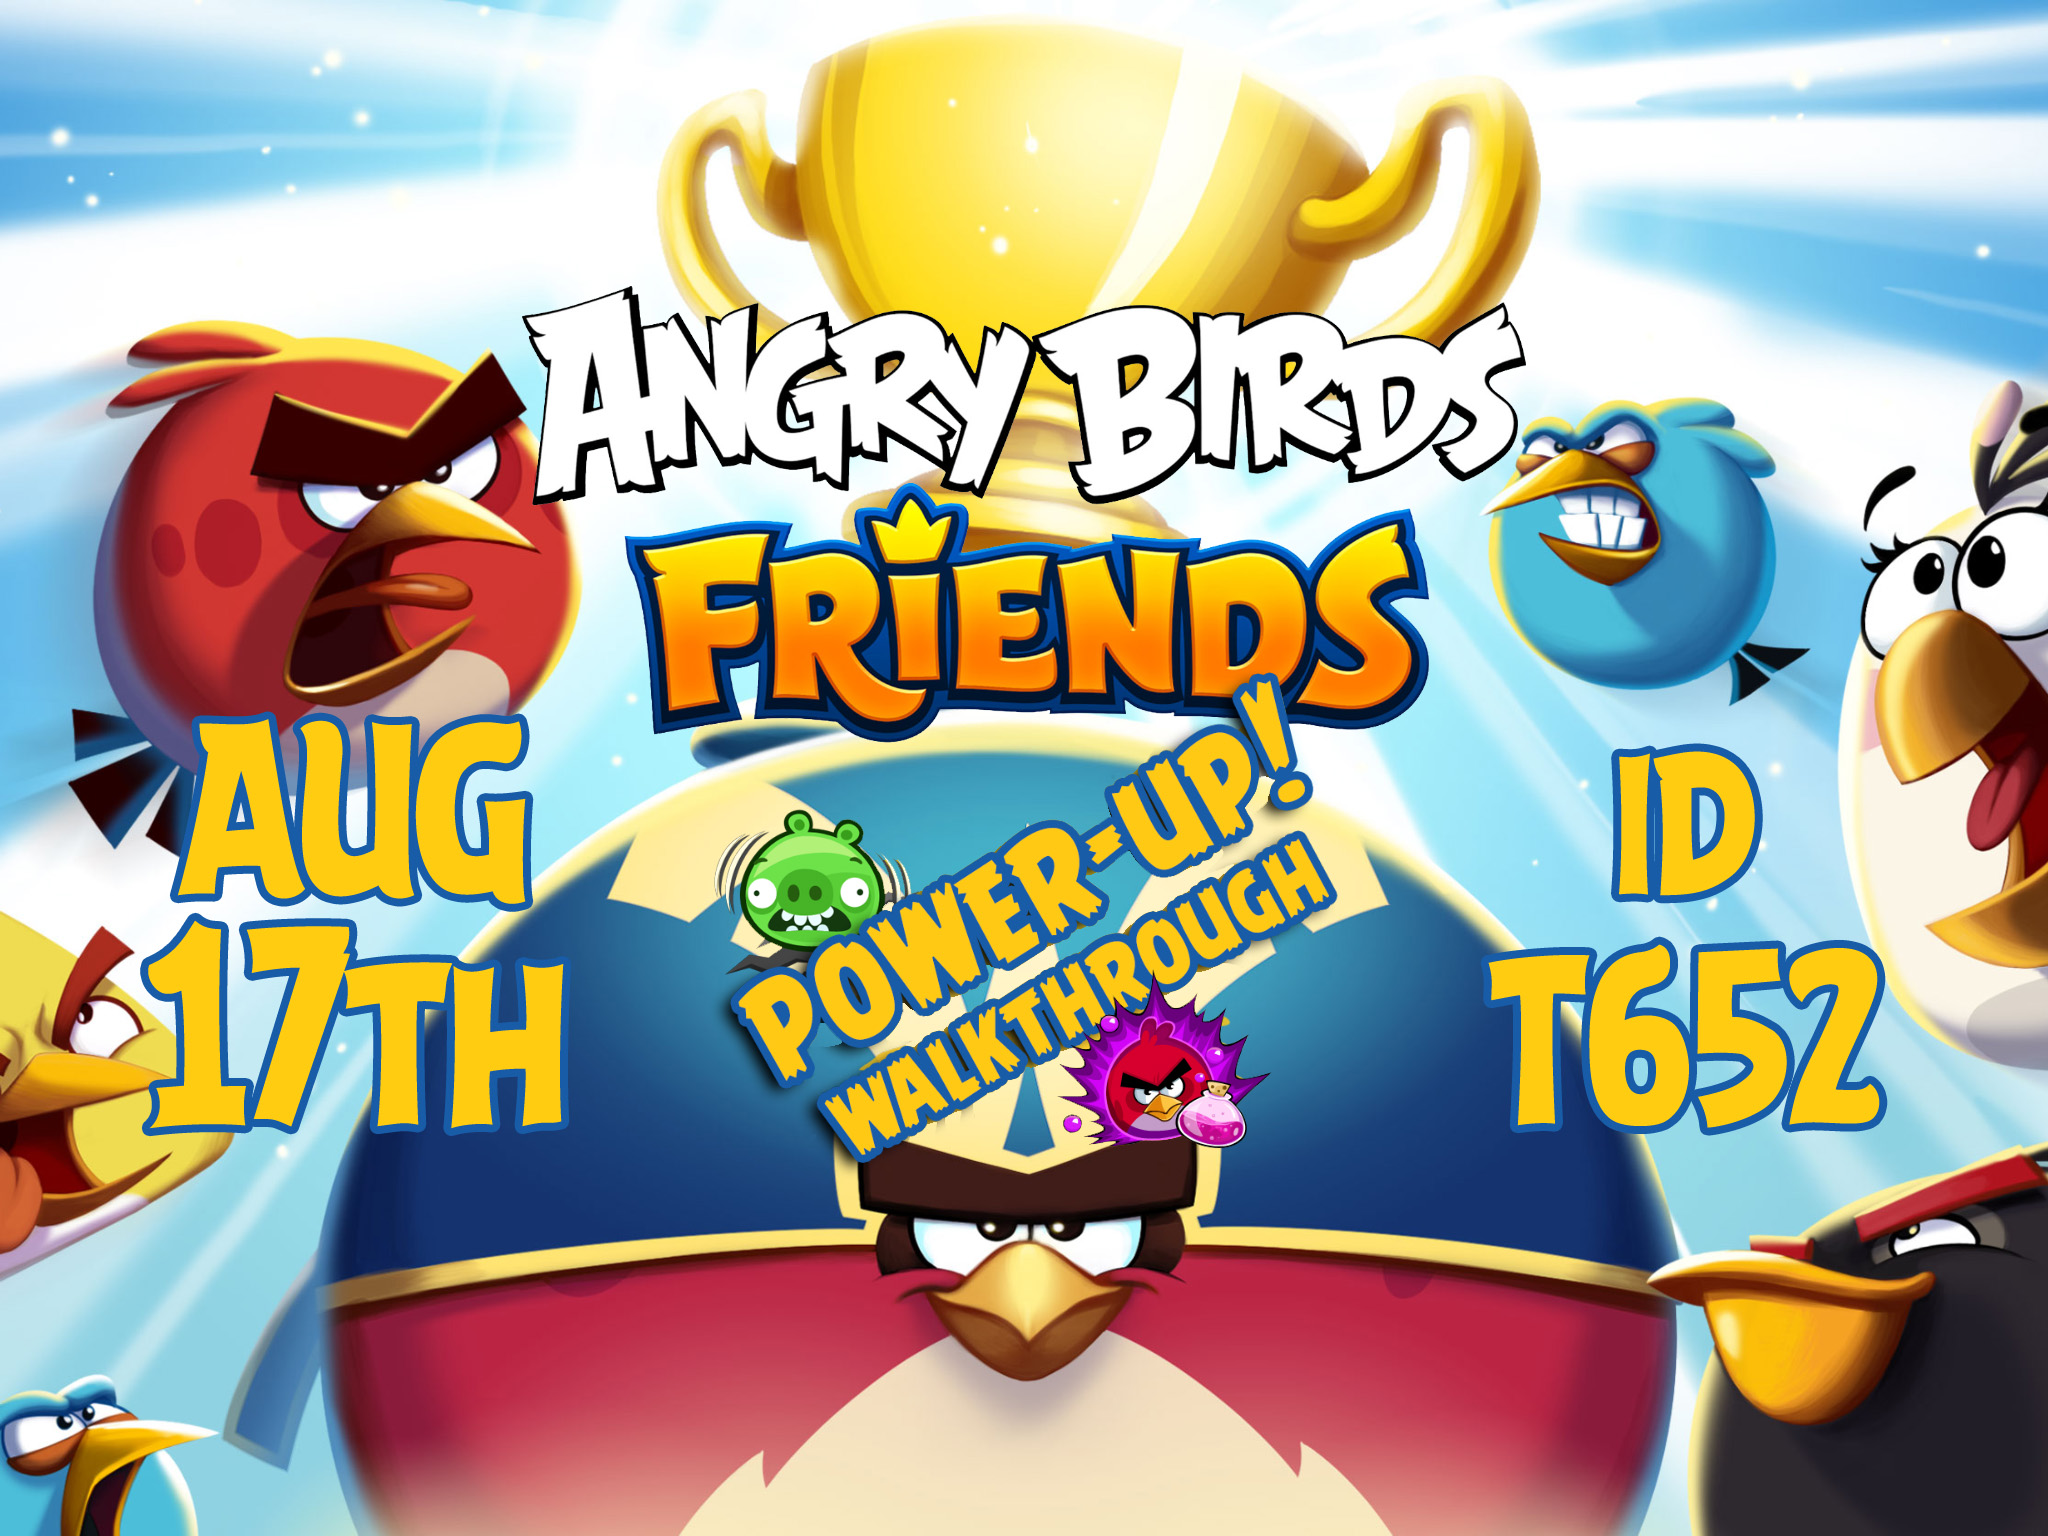 Angry-Birds-Friends-Tournament-T652-Feature-Image-PU